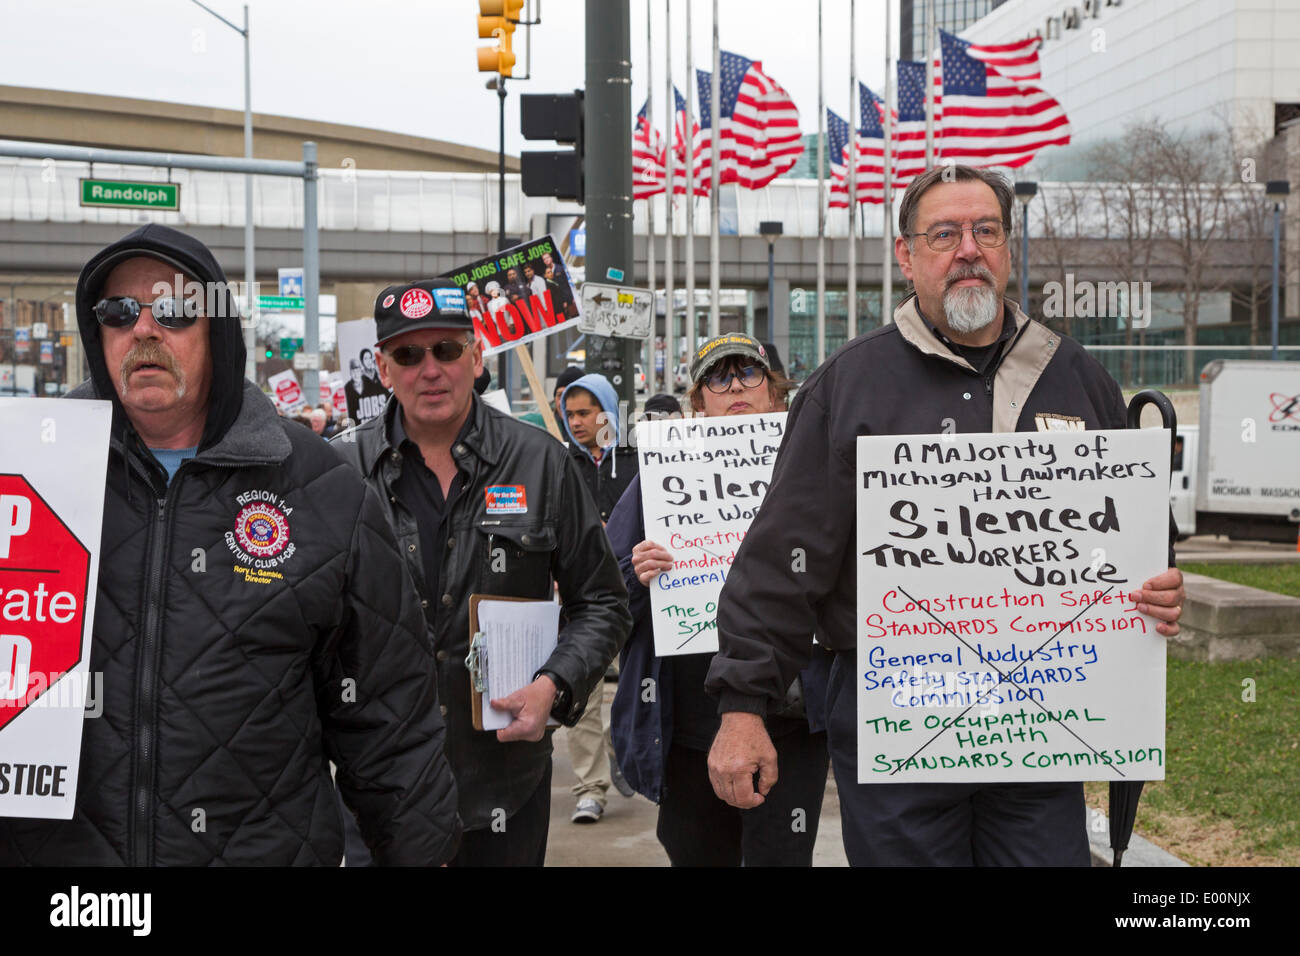 Detroit, Michigan USA - Union members mark Workers Memorial Day by holding a march and silent vigil to remember workers killed on the job. They say thousands of workers die in unsafe workplaces every year, and many more from occupational diseases. Credit:  Jim West/Alamy Live News Stock Photo